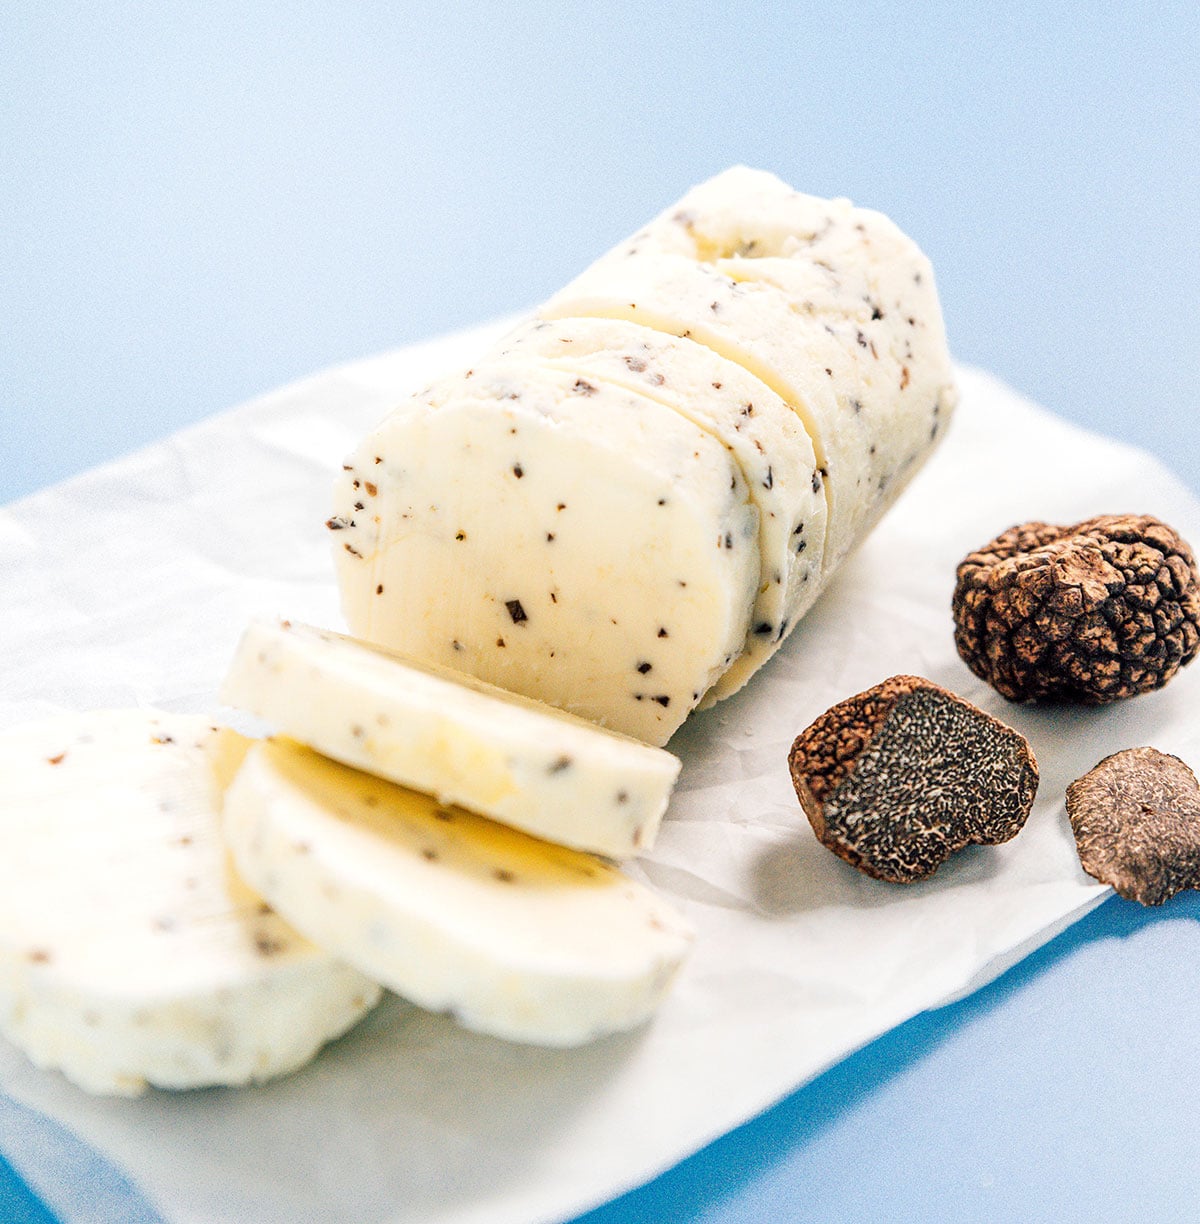 A log of black truffle butter sitting on top of a piece of parchment paper beside a couple of black truffles